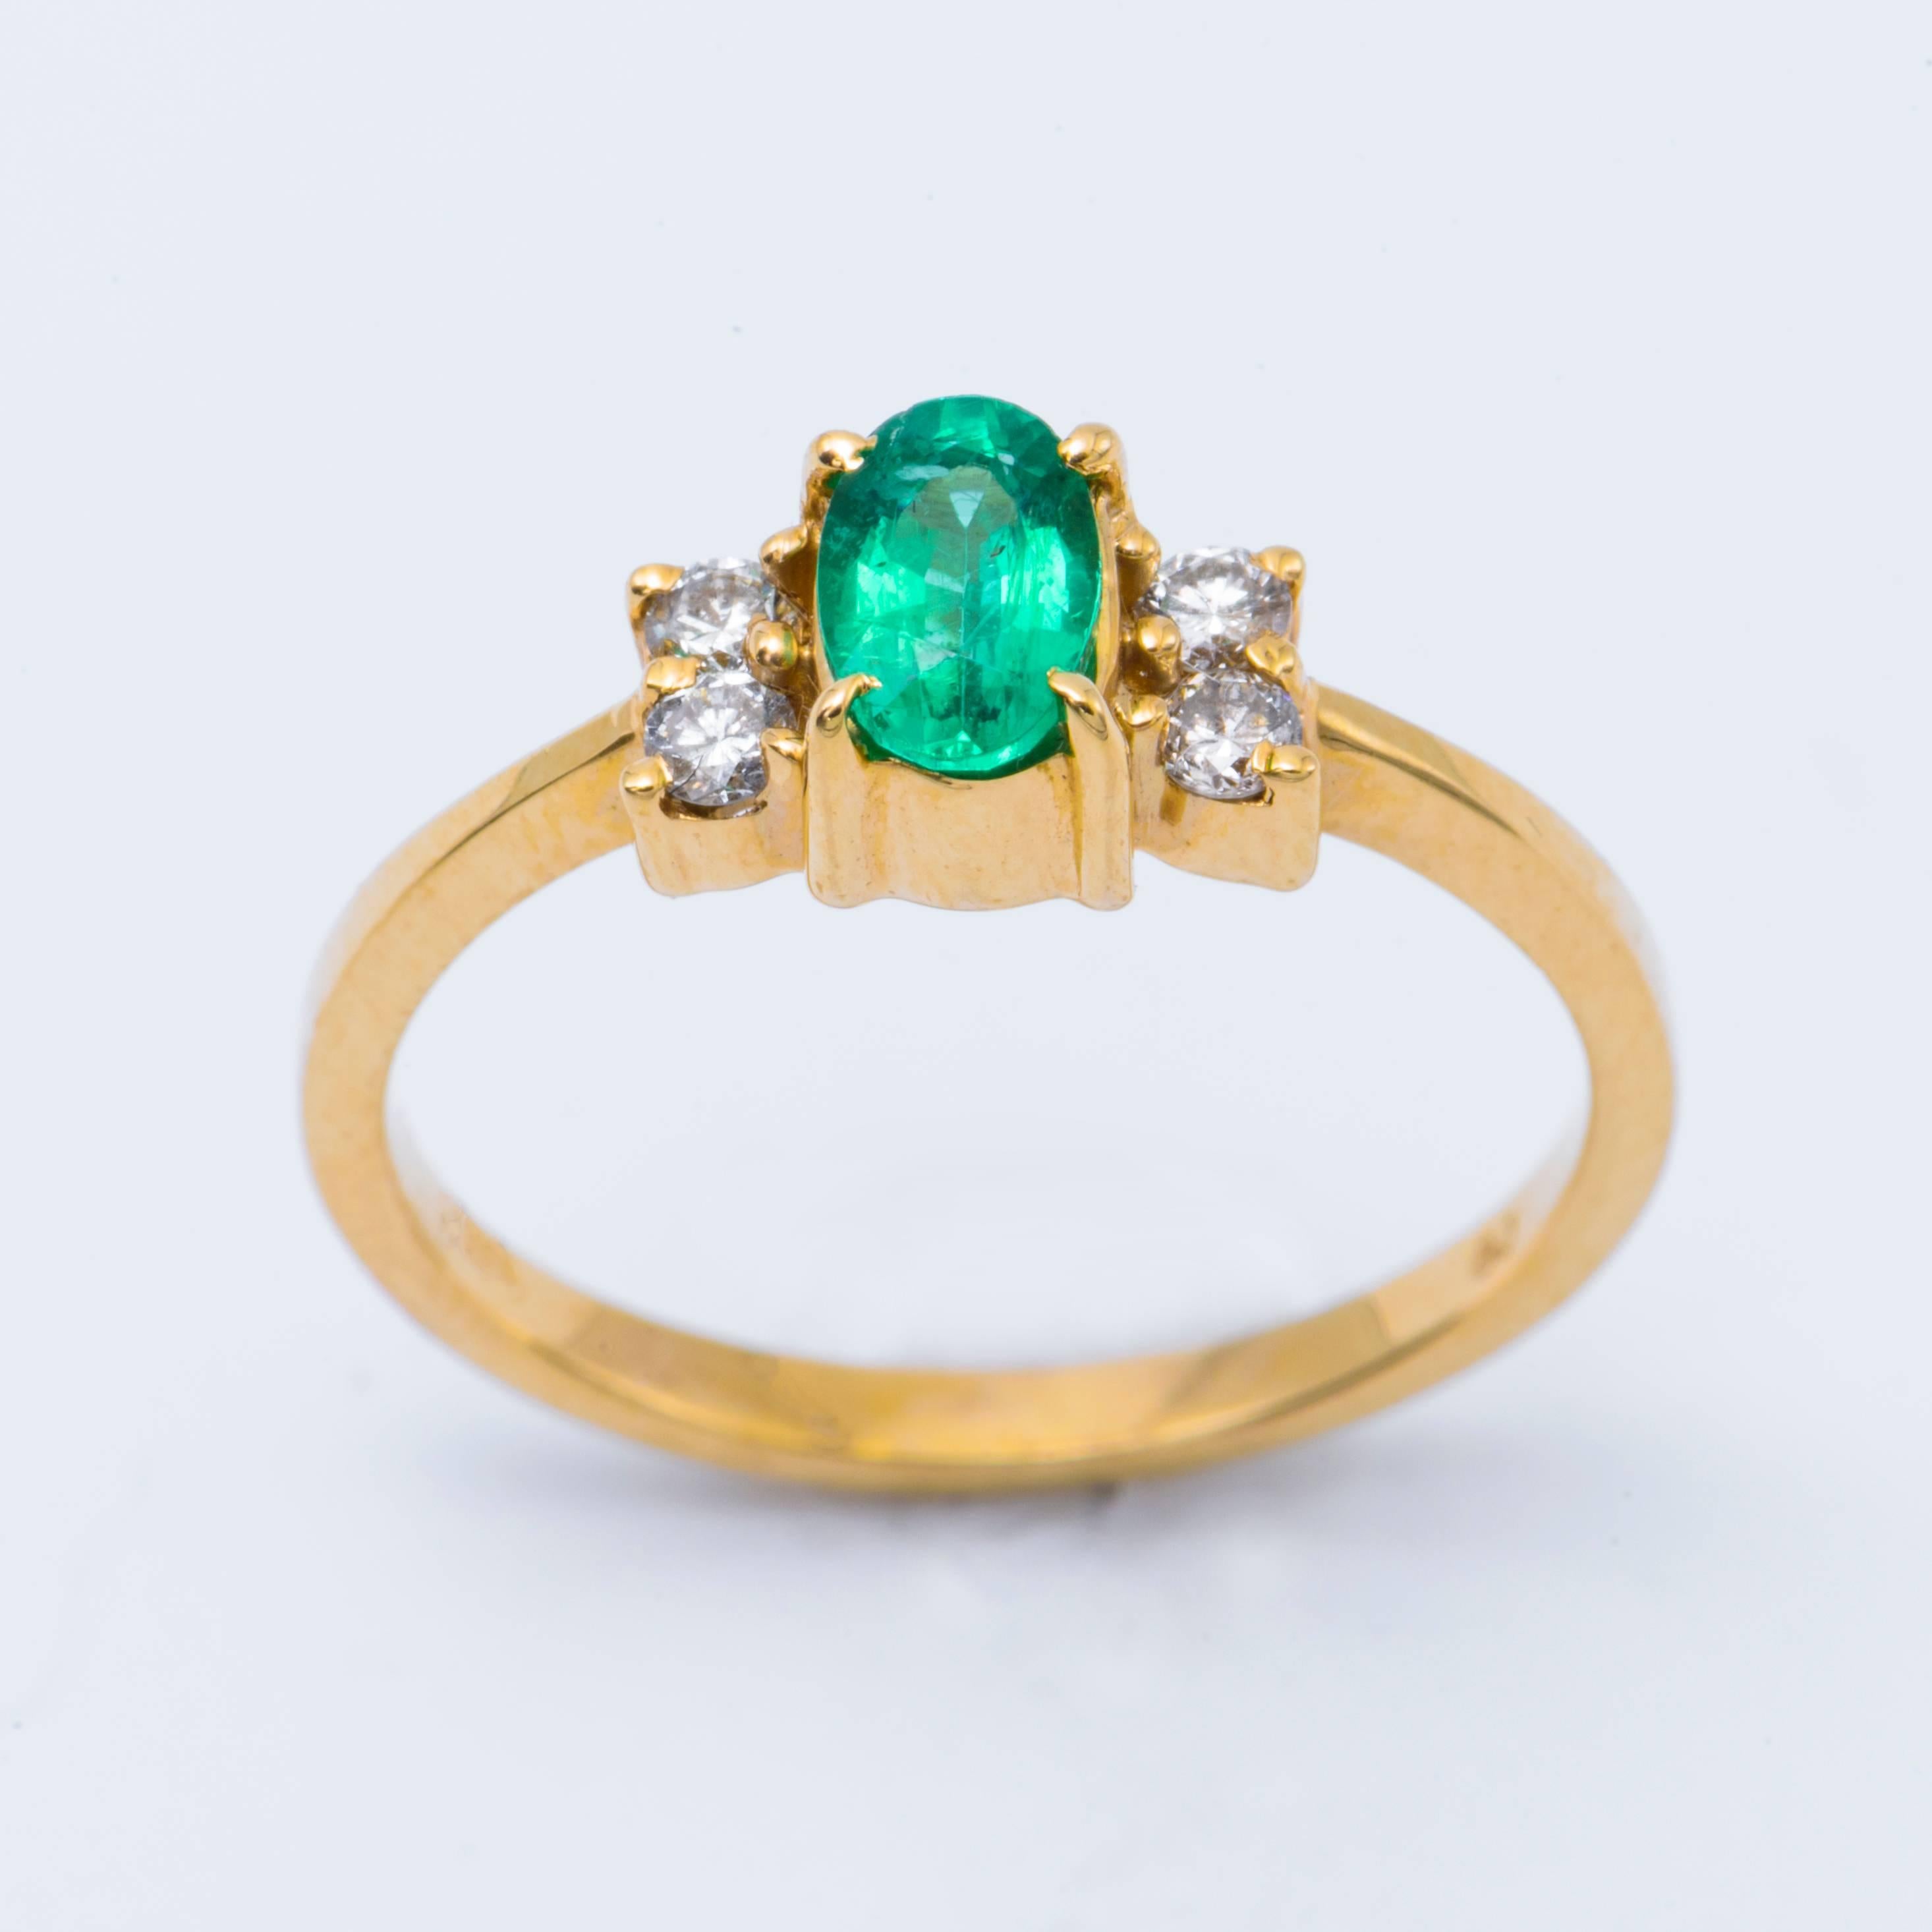 Contemporary Oval Shaped Emerald and Diamond Engagement Ring in Yellow Gold